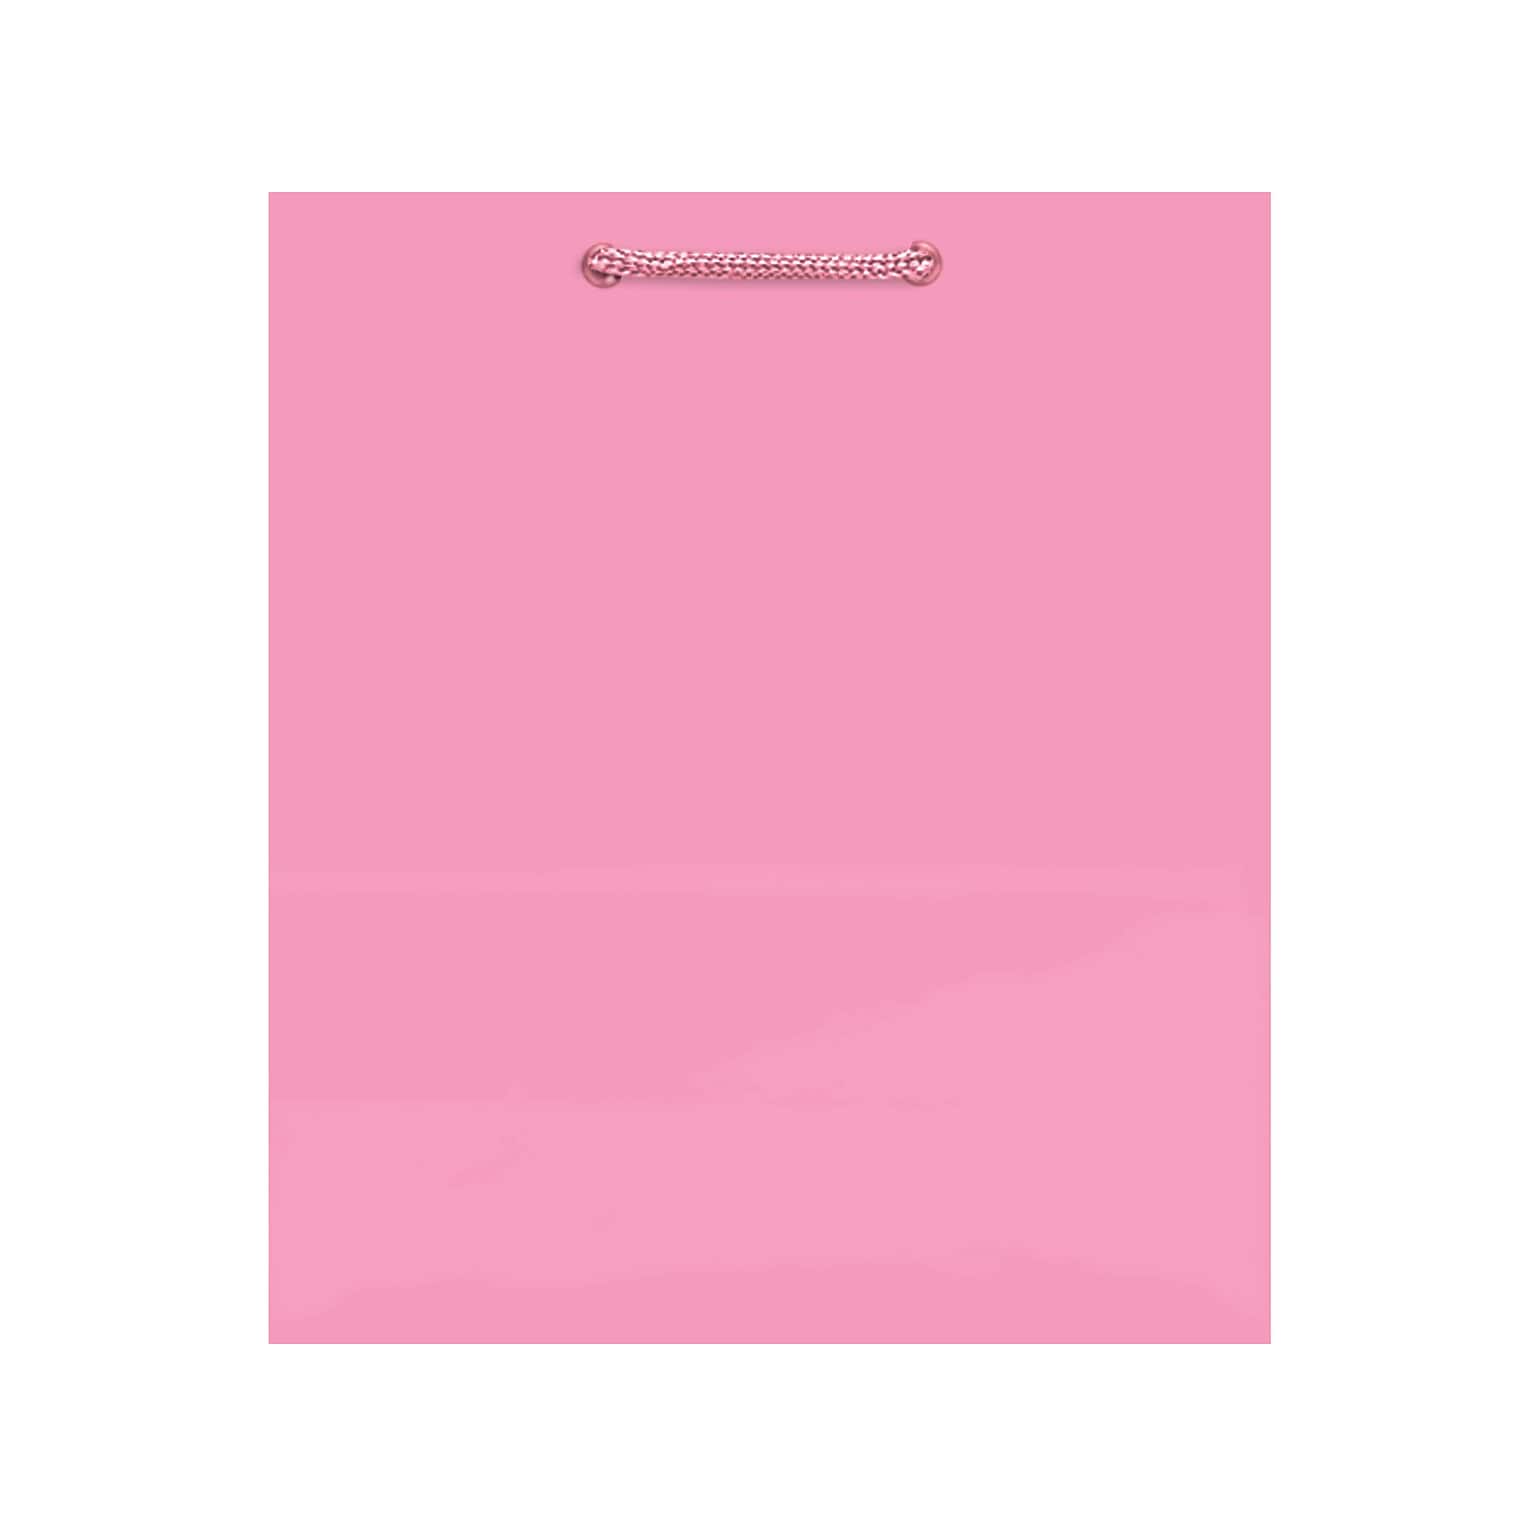 Amscan Glossy Paper Gift Bag, 9.5 x 8, New Pink, 10 Bags/Pack (47065.109)